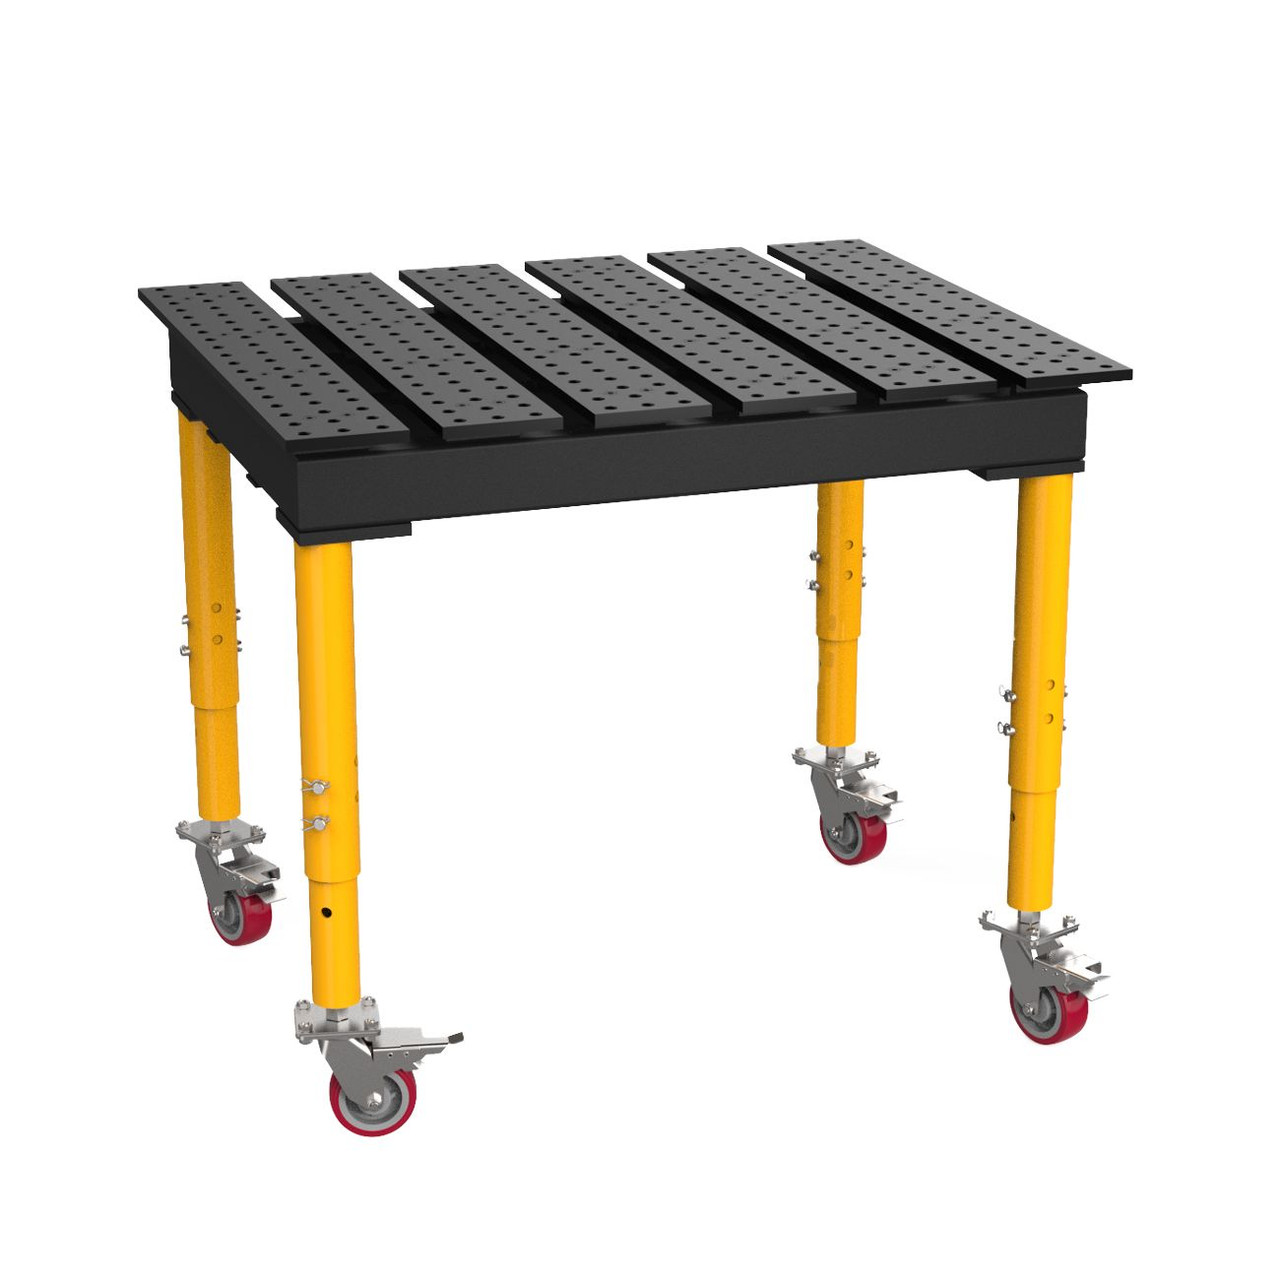 BuildPro 4' x 3' Slotted Welding Table, Standard Finish, Adjustable Heavy- Duty Legs with Casters, Table